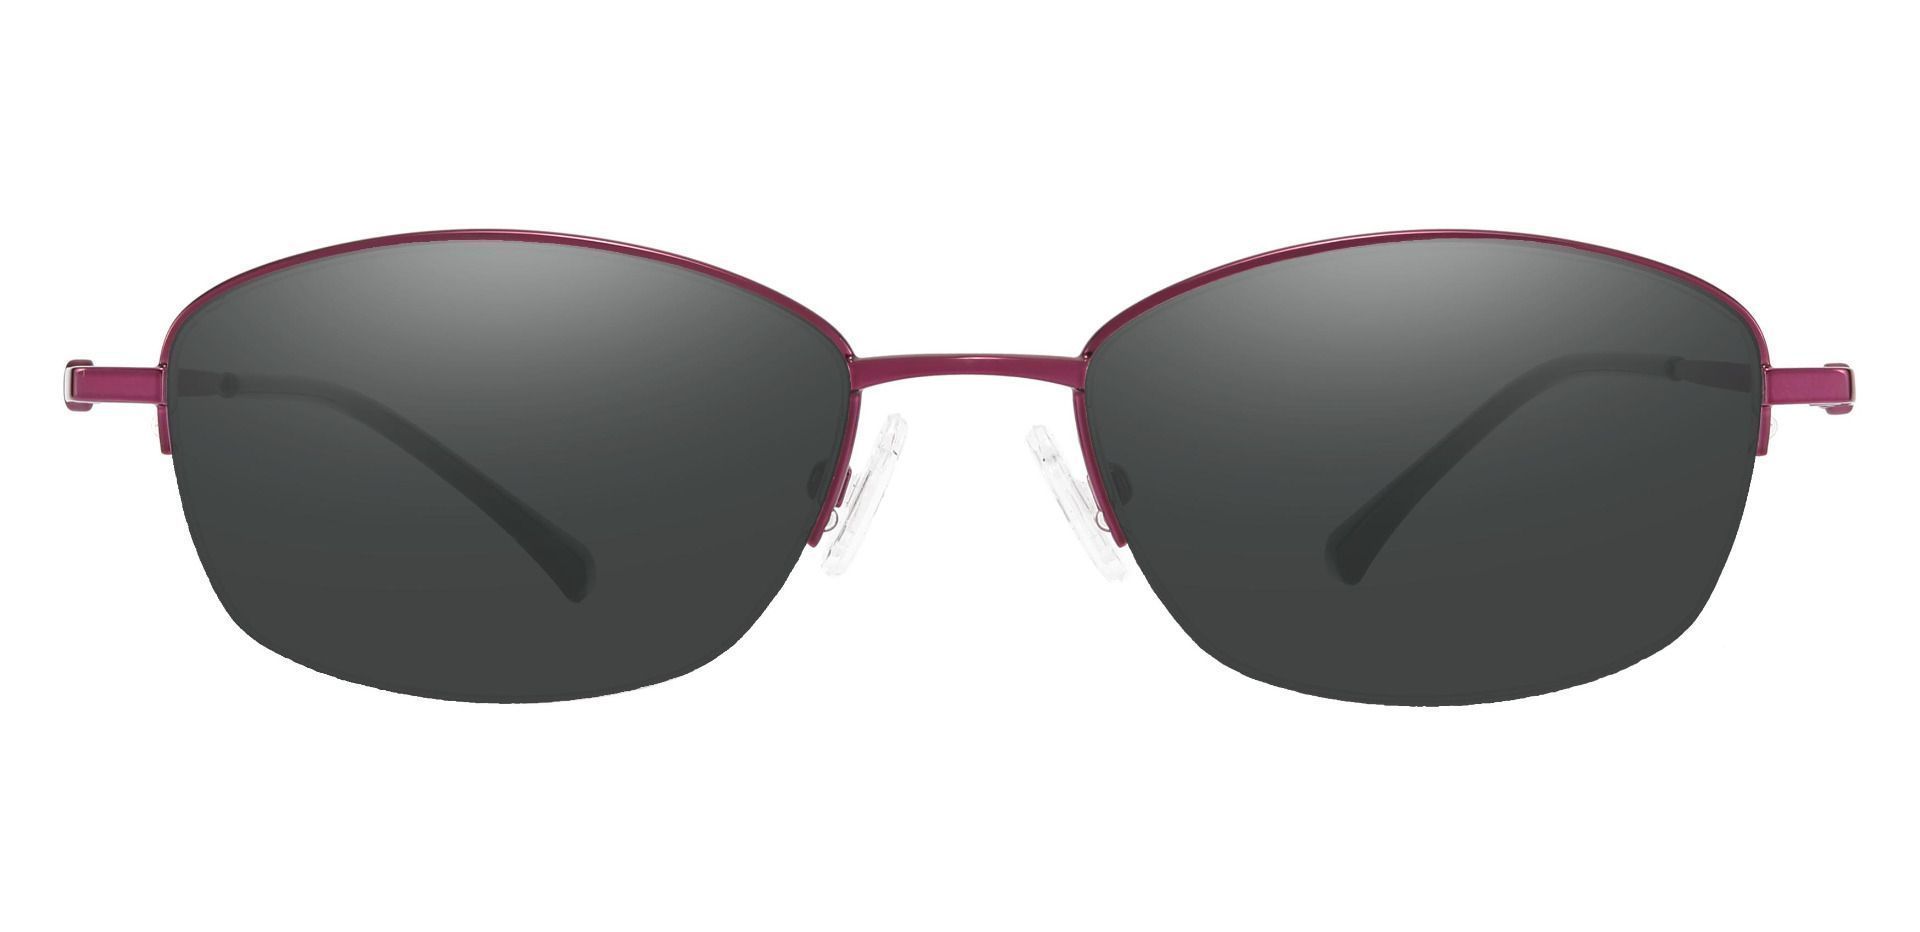 Beulah Oval Lined Bifocal Sunglasses - Purple Frame With Gray Lenses